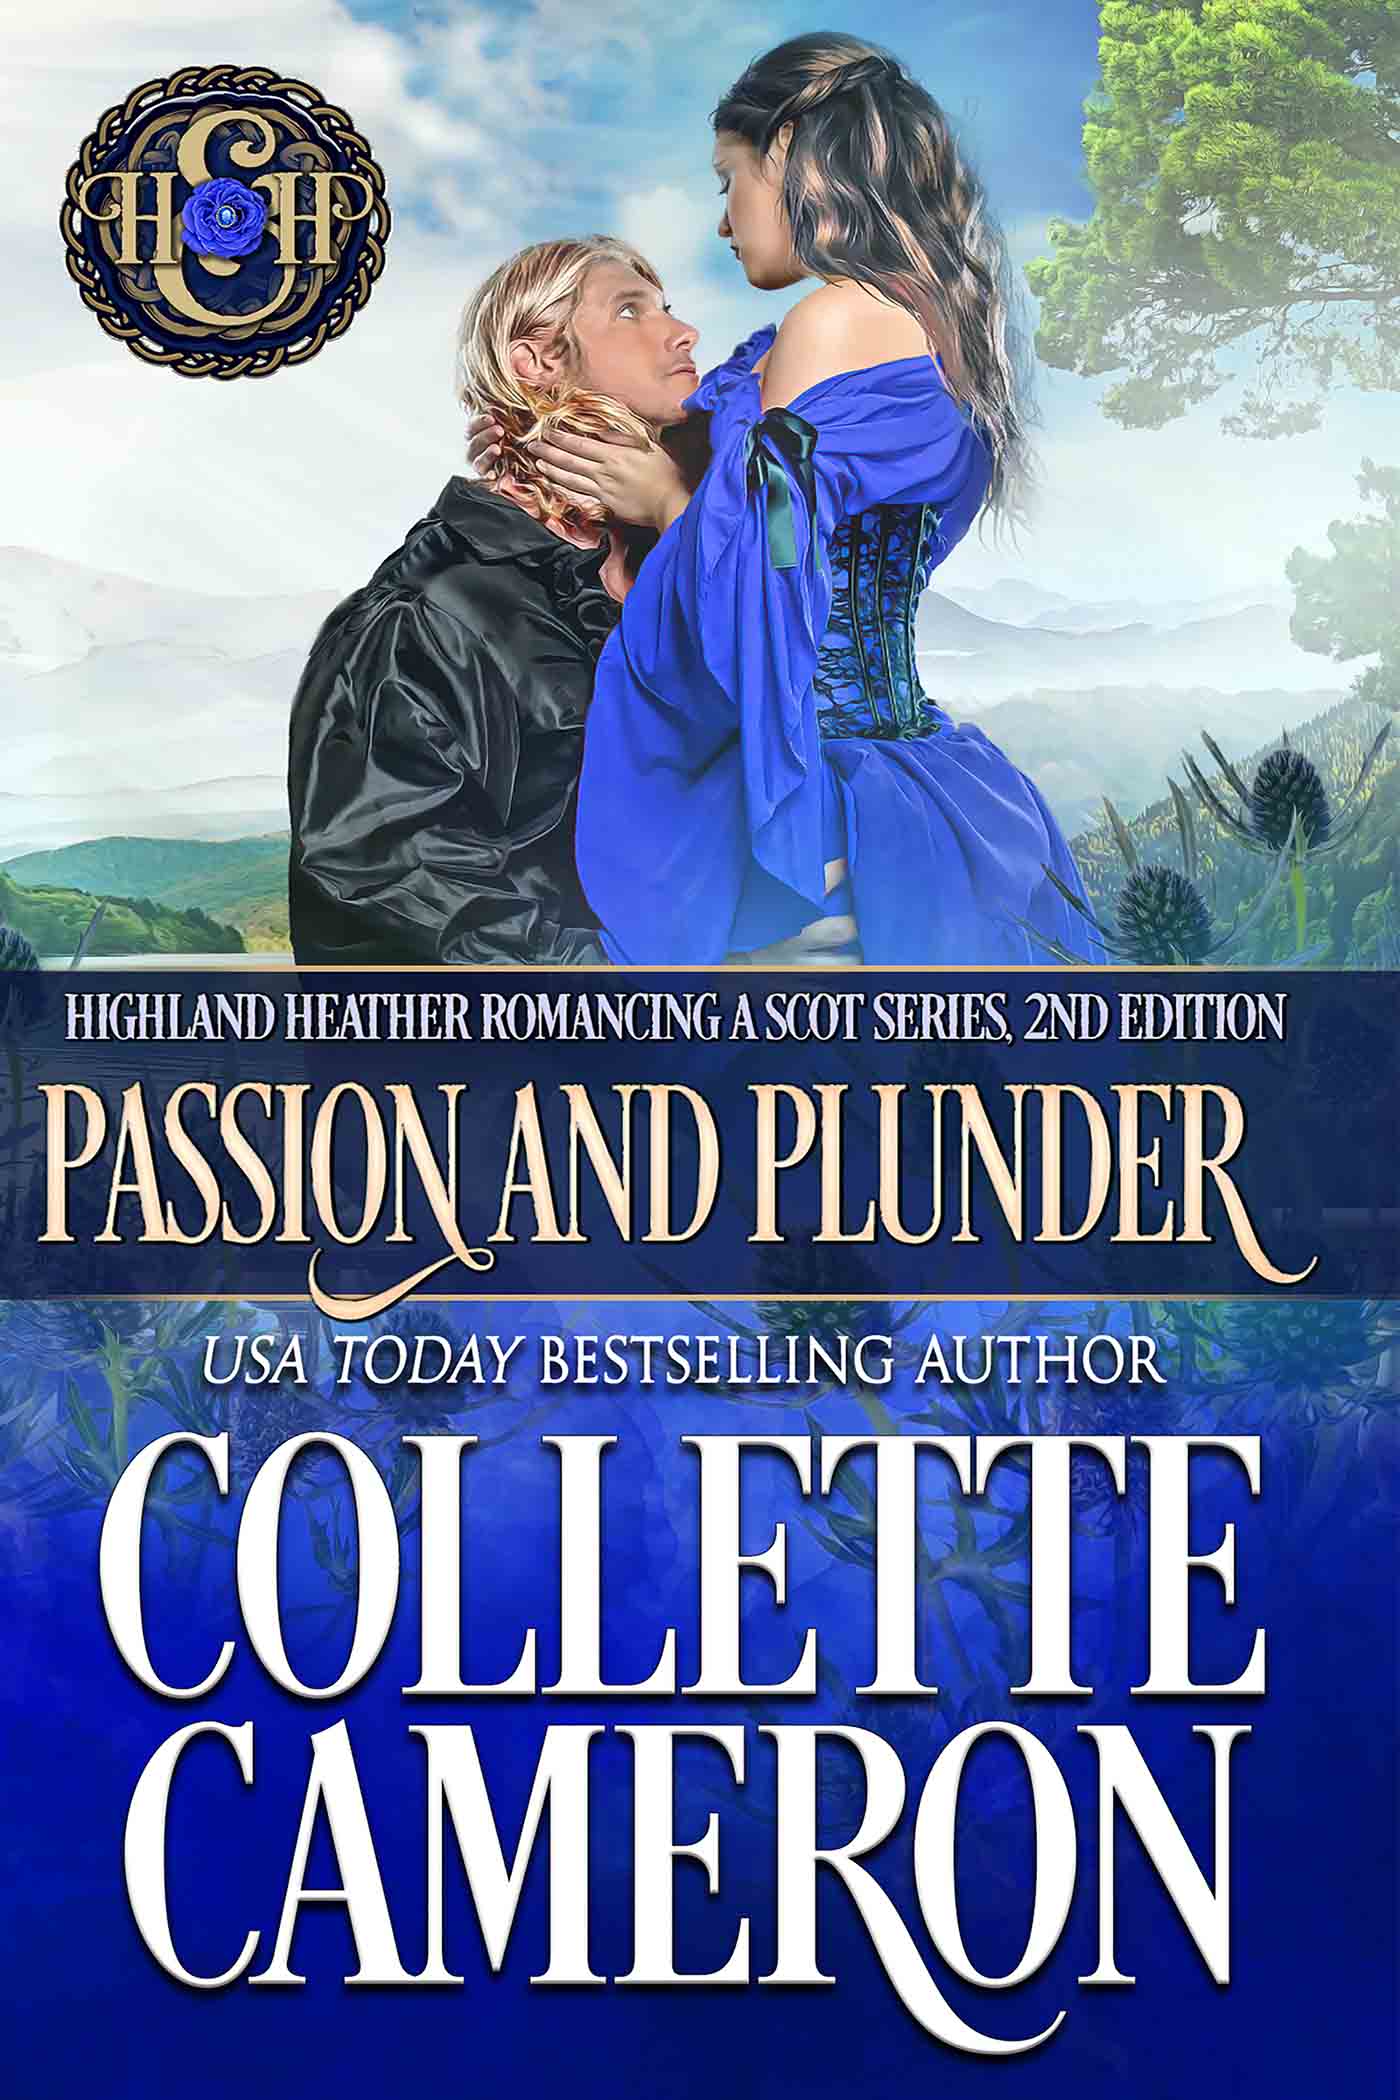 Passion and Plunder, Highland Heather Romancing a Scot Series, USA Today Bestselling Author Collette Cameron, Collette Cameron historical romances, Collette Cameron Regency romances, Collette Cameron romance novels, Collette Cameron Scottish historical romance books, Blue Rose Romance, Bestselling historical romance authors, historical romance novels, Regency romance novels, Highlander romance books, Scottish romance novels, romance novel covers, Bestselling romance novels, Bestselling Regency romances, Bestselling Scottish Romances, Bestselling Highlander romances, Victorian Romances, lords and ladies romance novels, Regency England Dukes romance books, aristocrats and royalty, happily ever after novels, love stories, wallflowers, rakes and rogues, award-winning books, Award-winning author, historical romance audio books, collettecameron.com, The Regency Rose Newsletter, Sweet-to-Spicy Timeless Romance, historical romance meme, romance meme, historical regency romance 